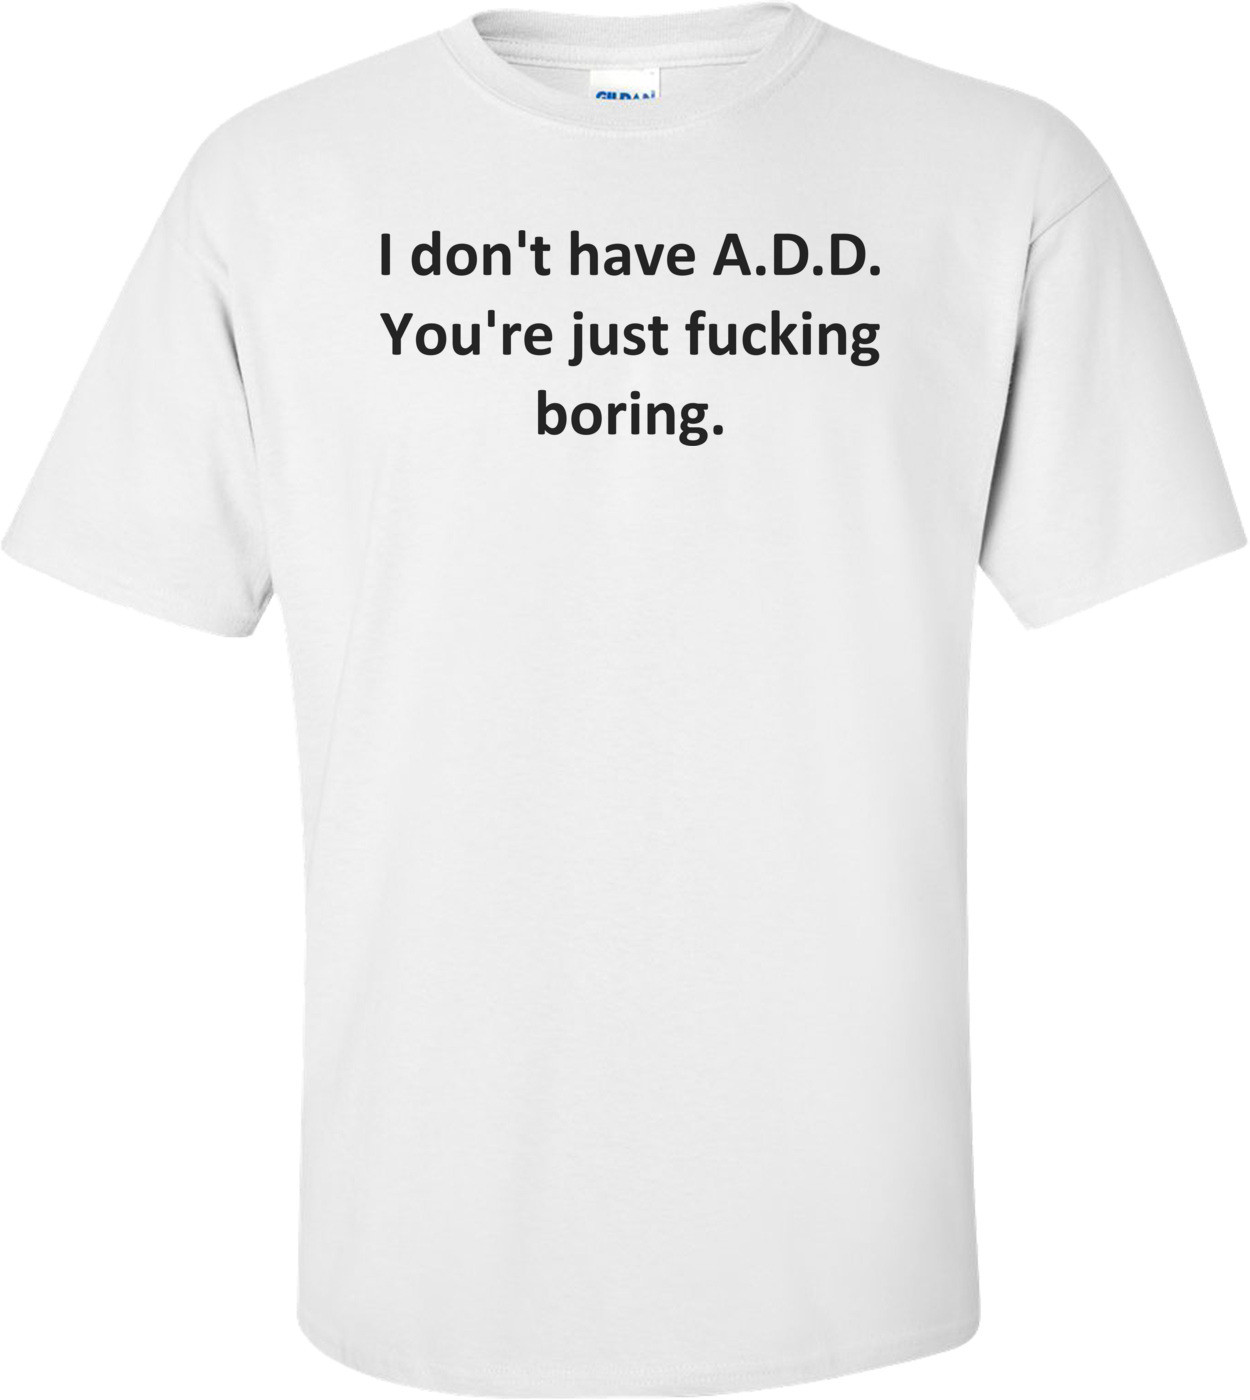 I don't have A.D.D. You're just fucking boring.